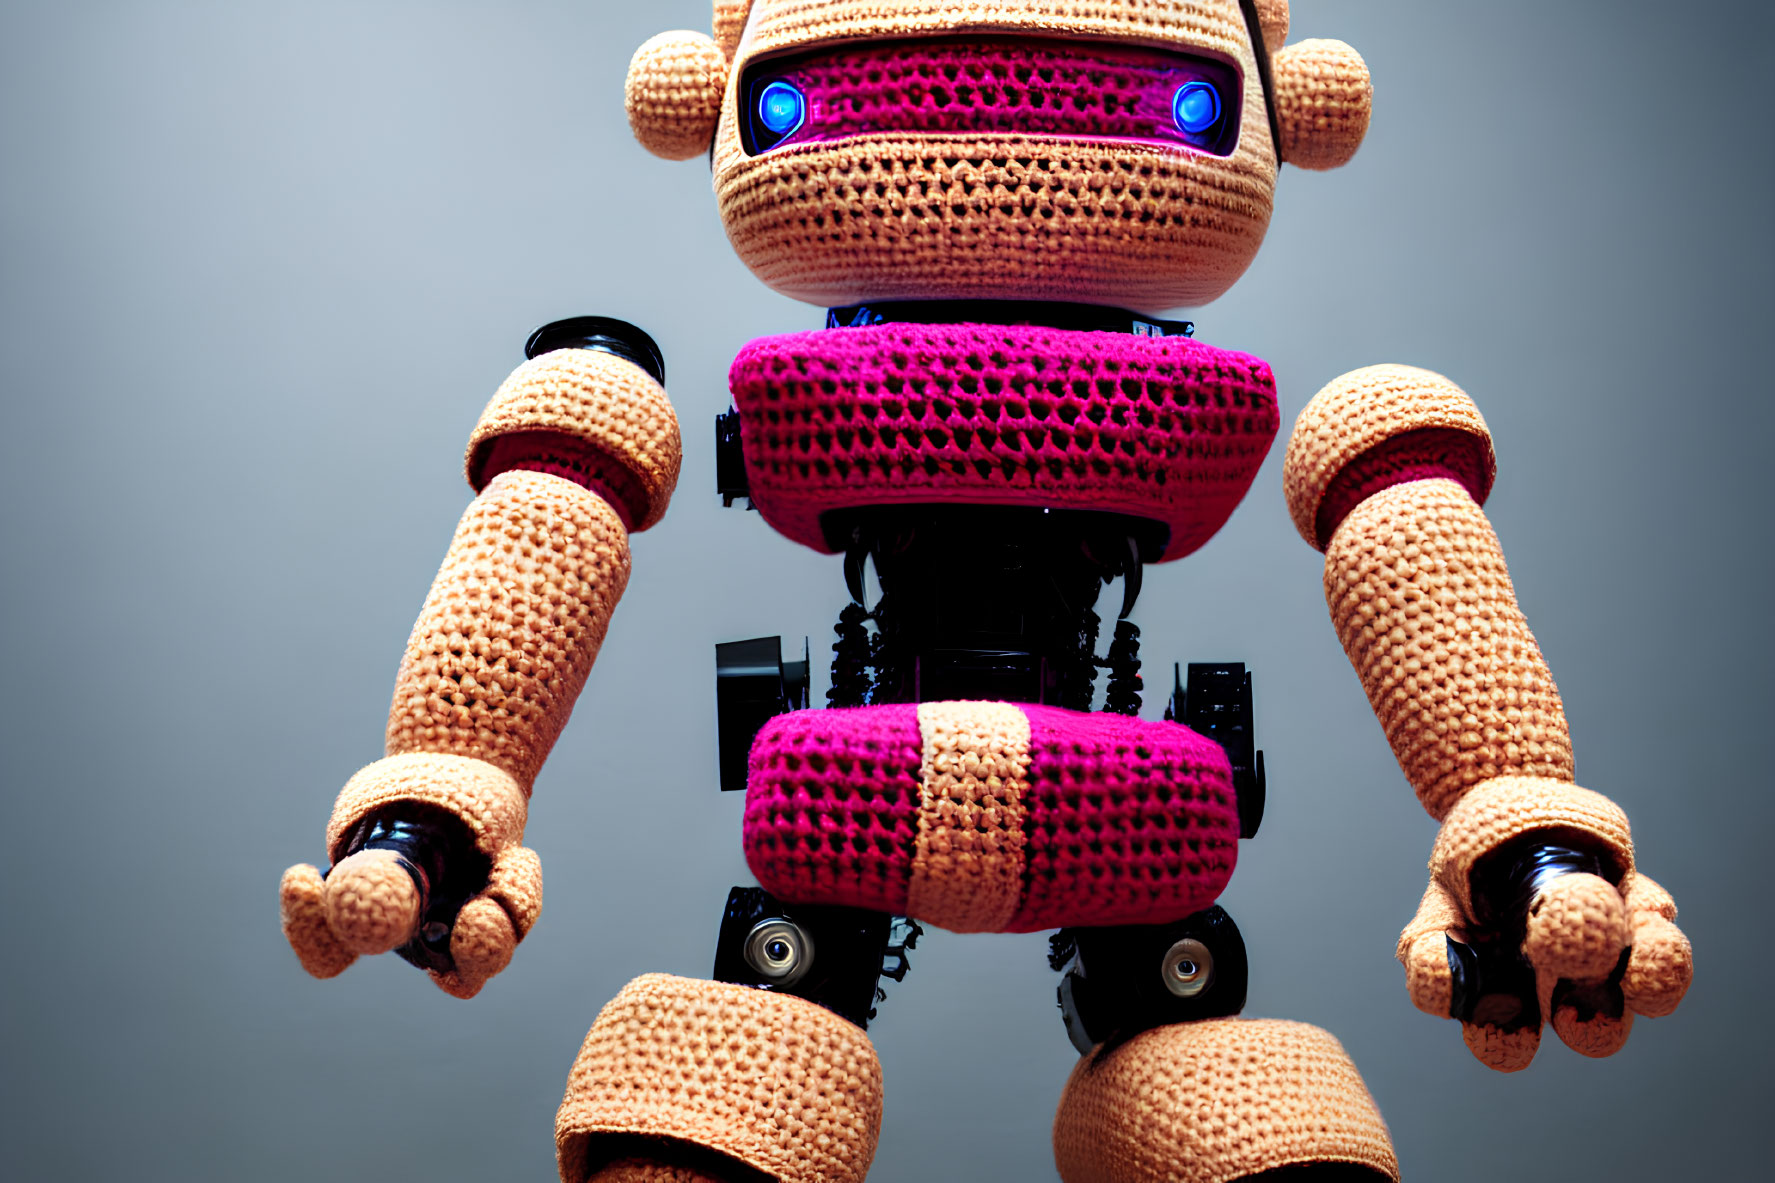 Crochet-covered robot with blue illuminated eyes on neutral background